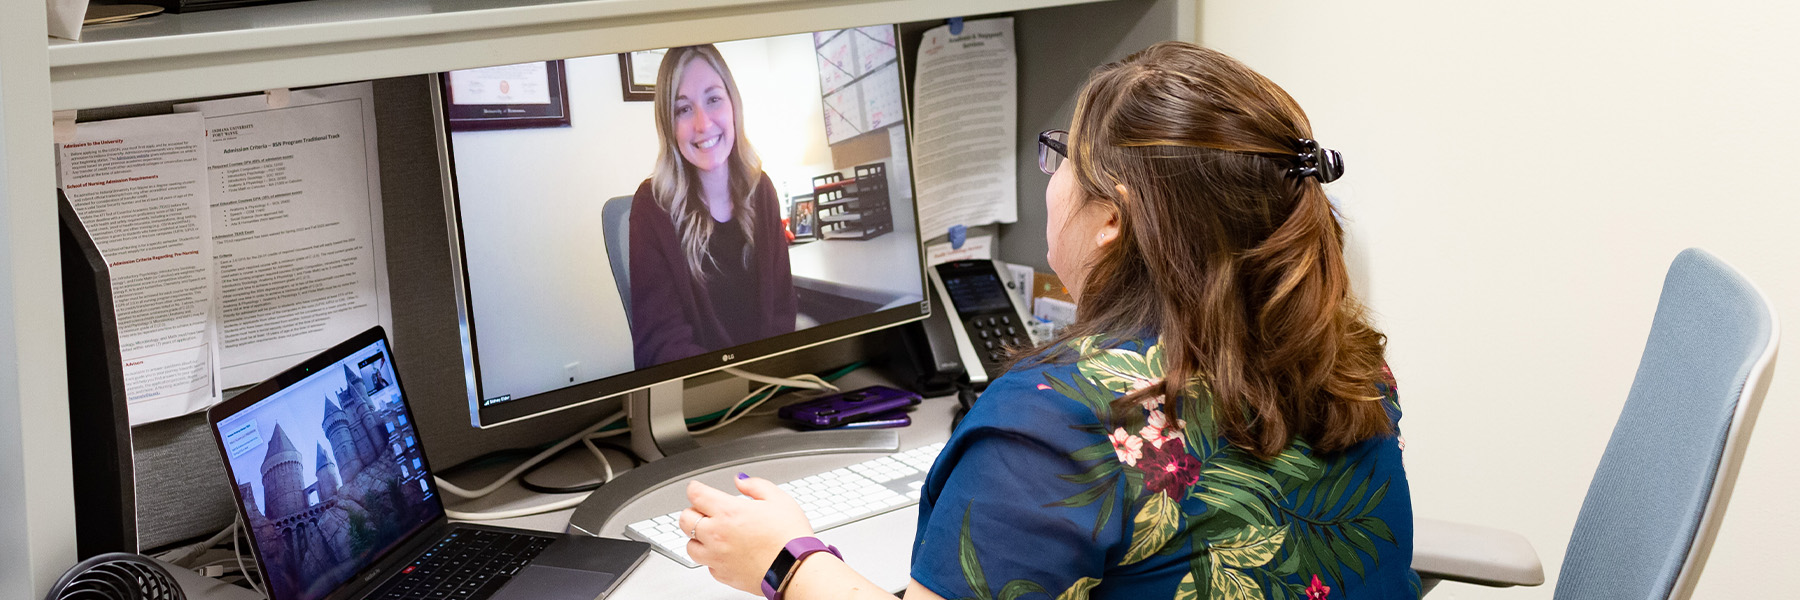 Two people during an online videconferencing call